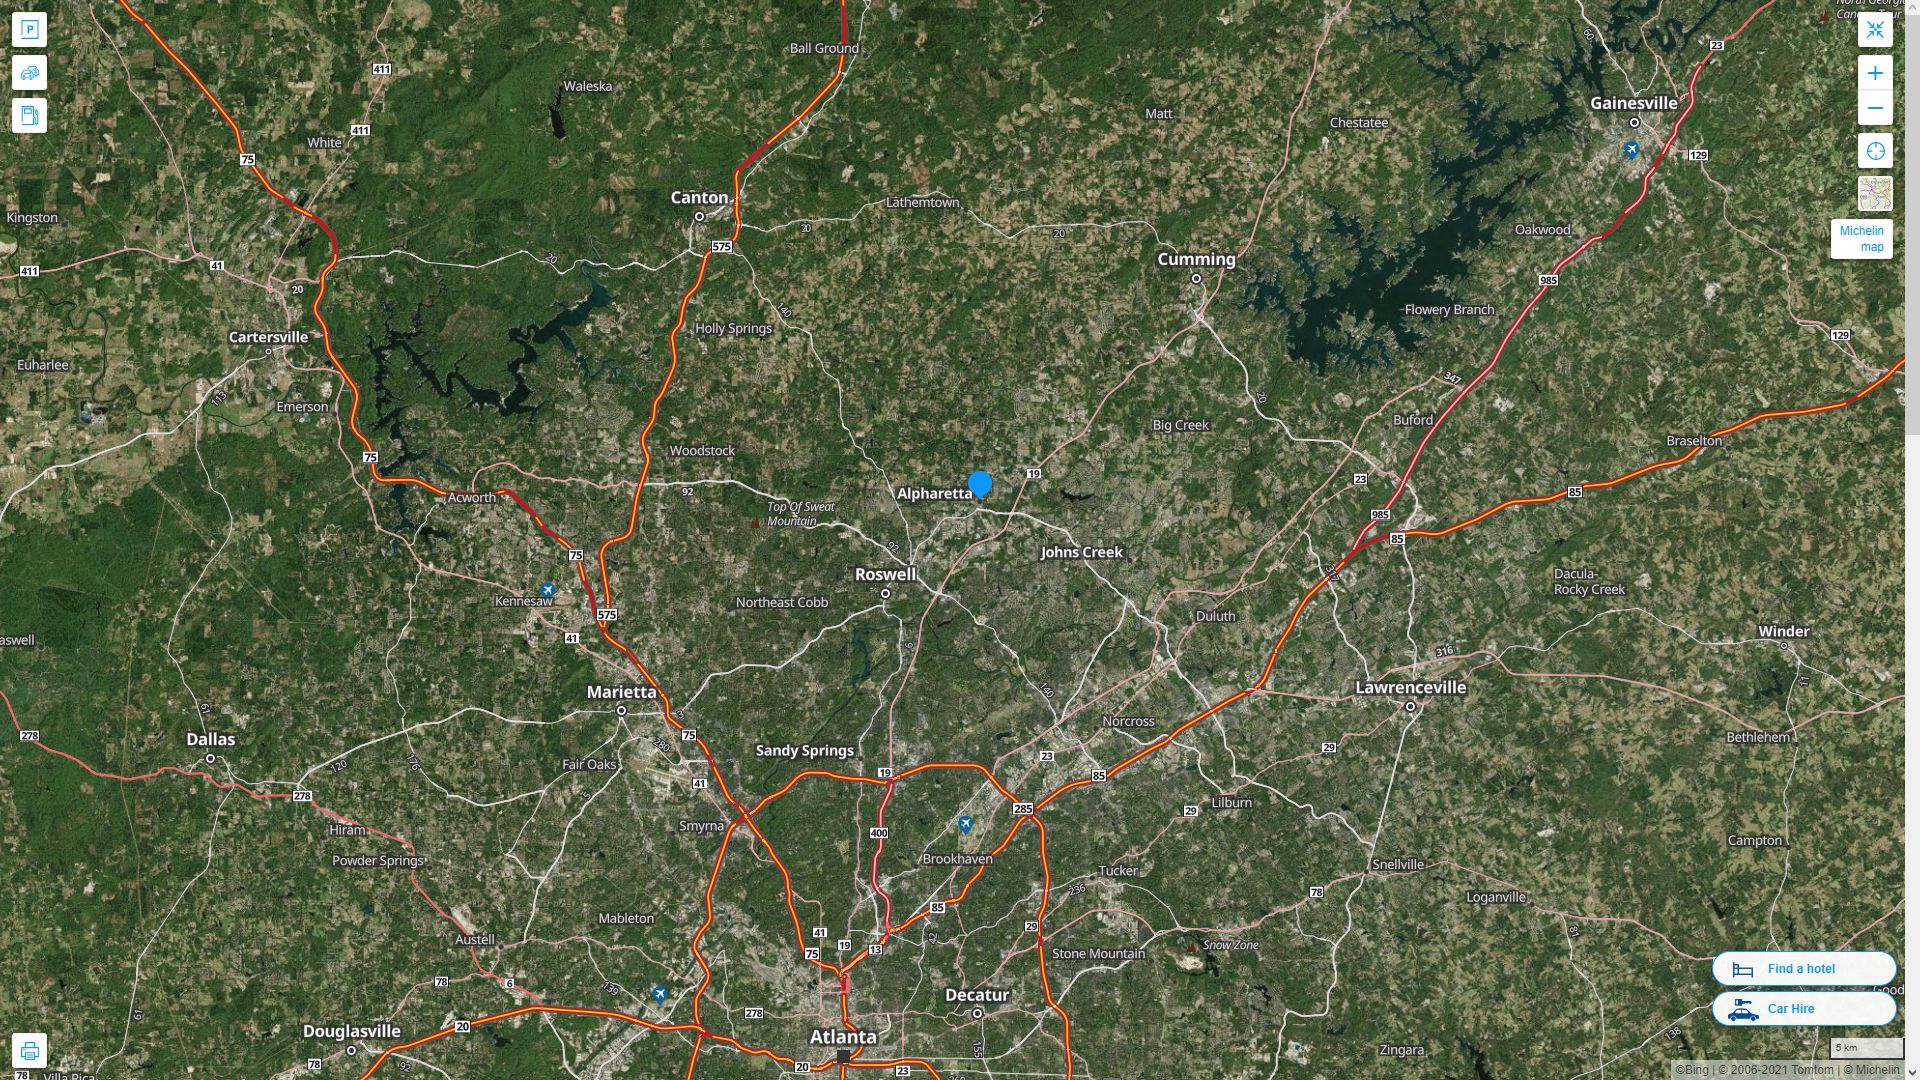 Alpharetta Georgia Highway and Road Map with Satellite View